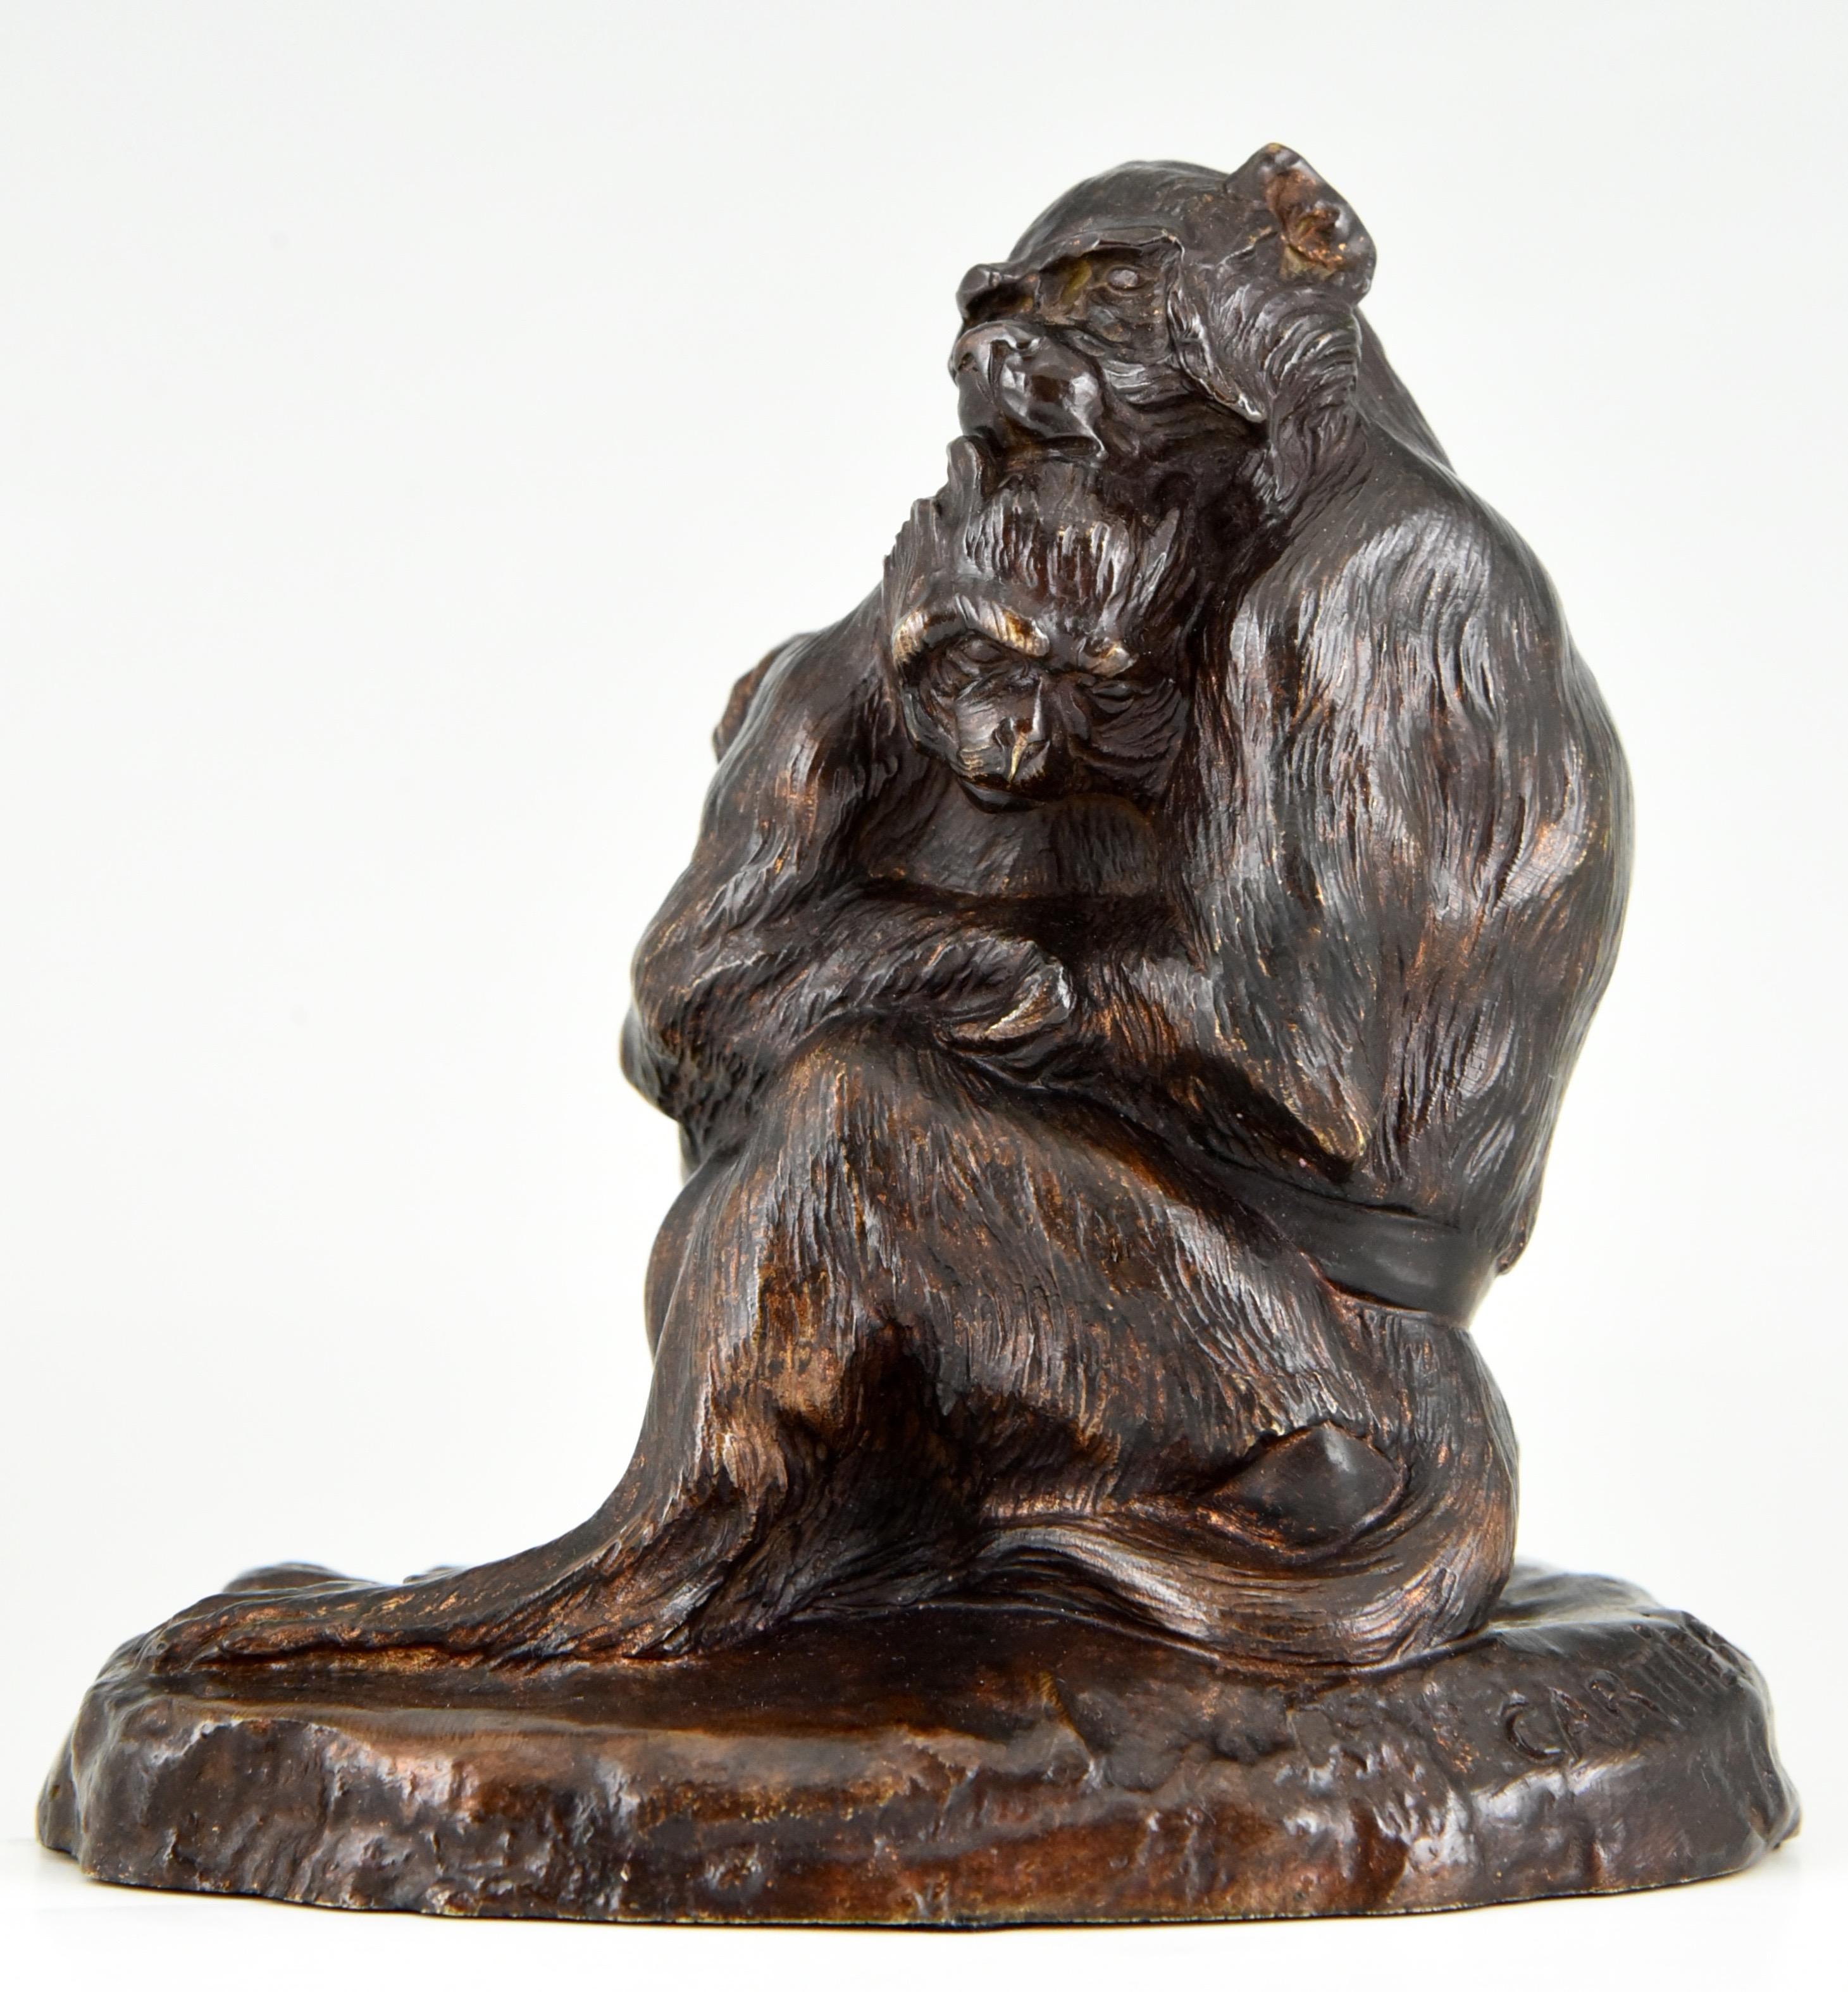 Antique bronze sculpture of two monkeys, mother and child by the French artist Thomas Cartier, 1879-1943, with a beautiful dark brown patina.
Literature:
“Bronzes, sculptors and founders” by H. Berman, Abage. ?“Les bronzes de XIXe siècle” by